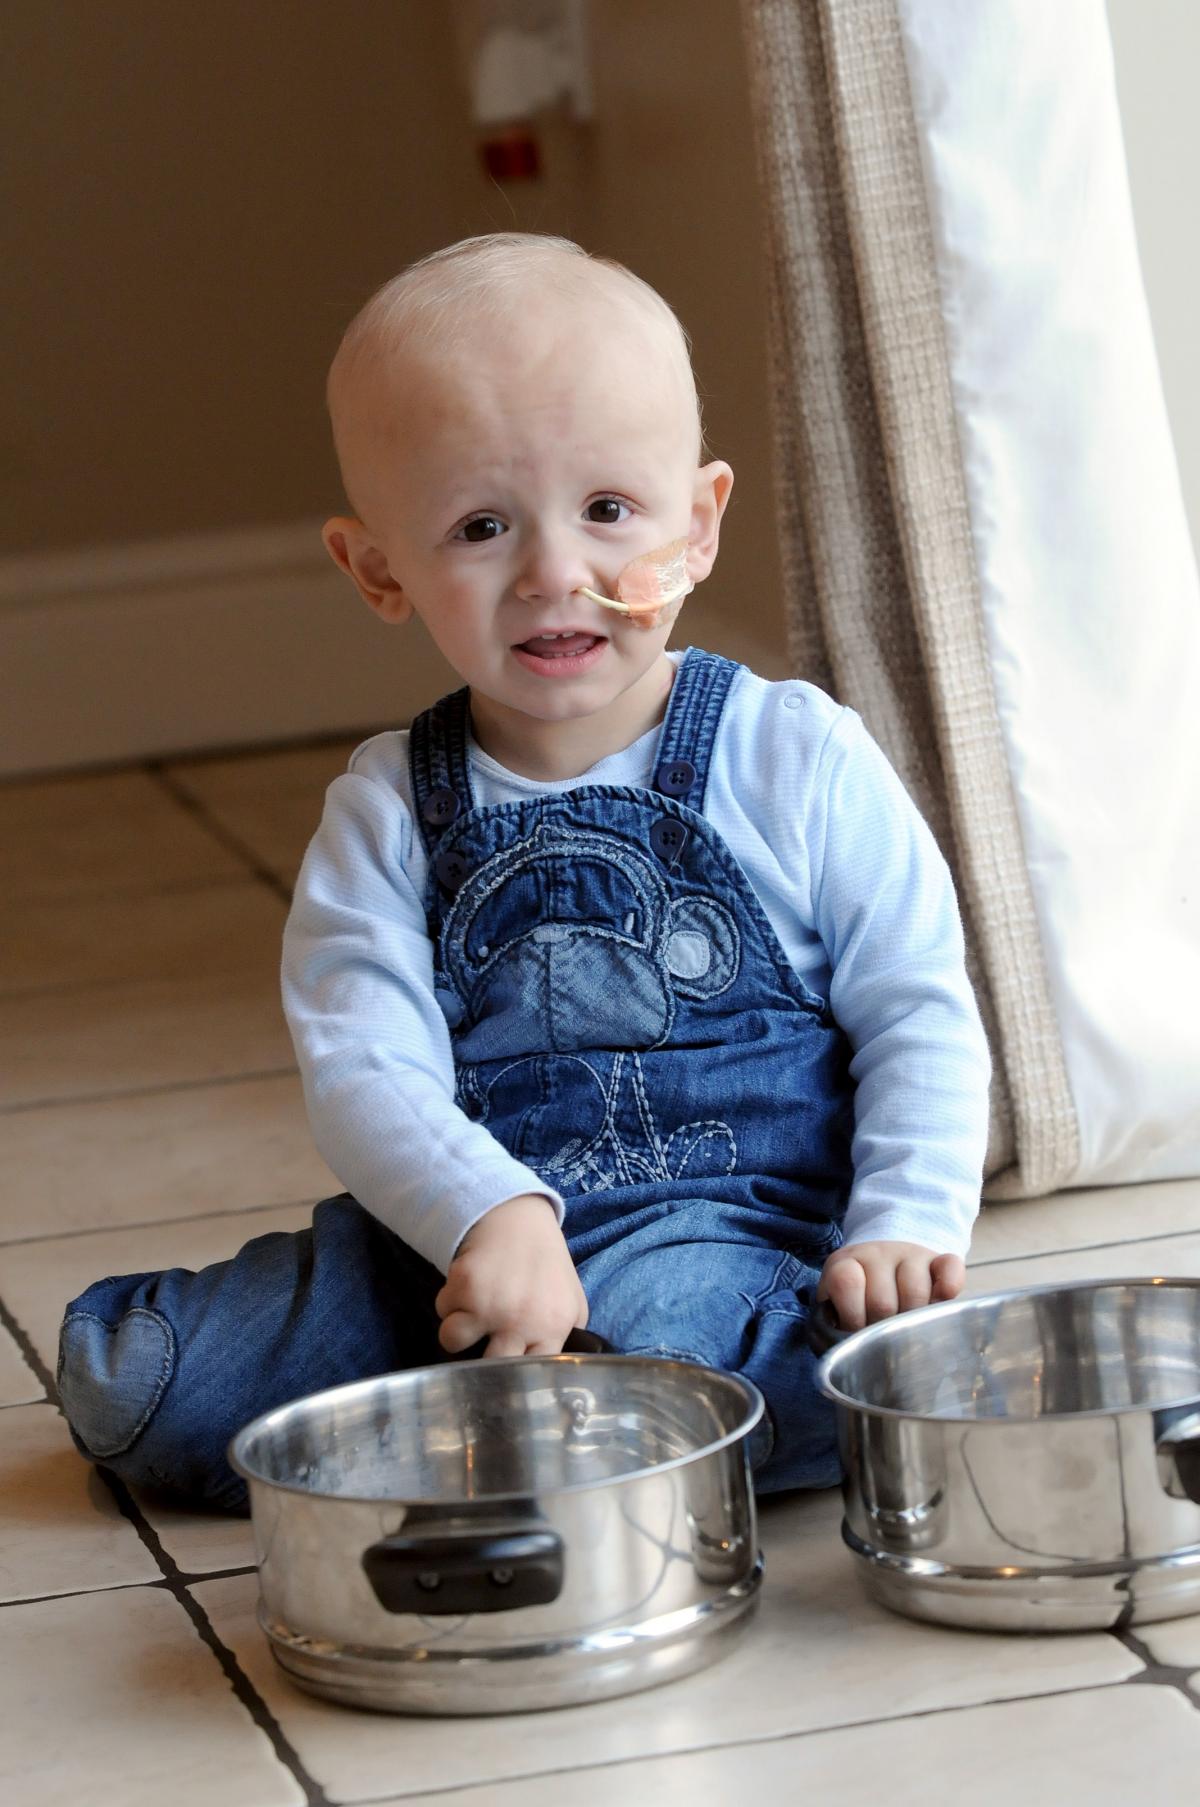 Parker Royle from Great Sankey is battling a rare form of cancer.